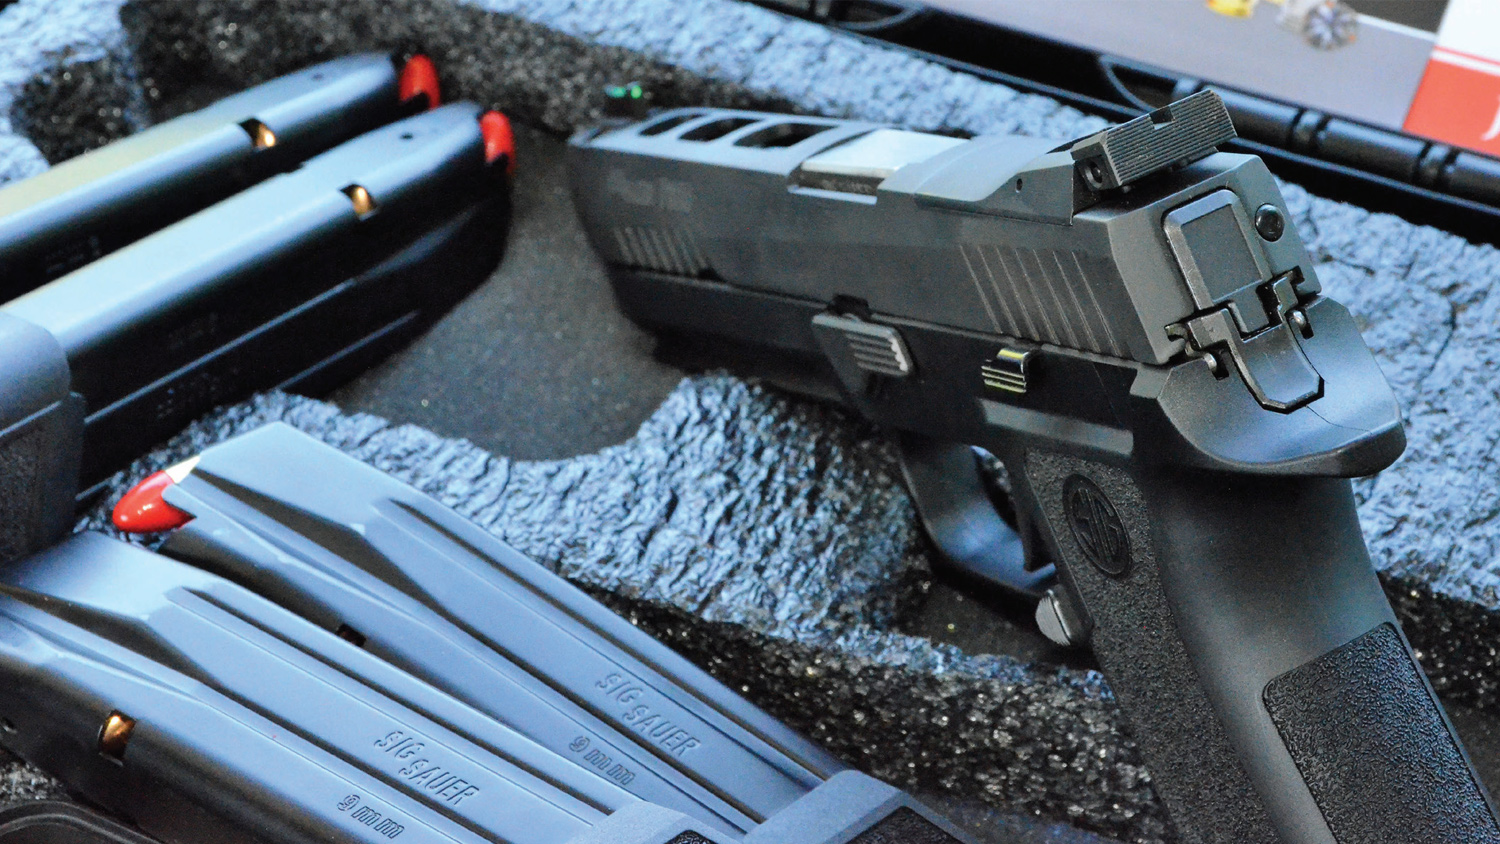 SIG P320 X5 with magazines